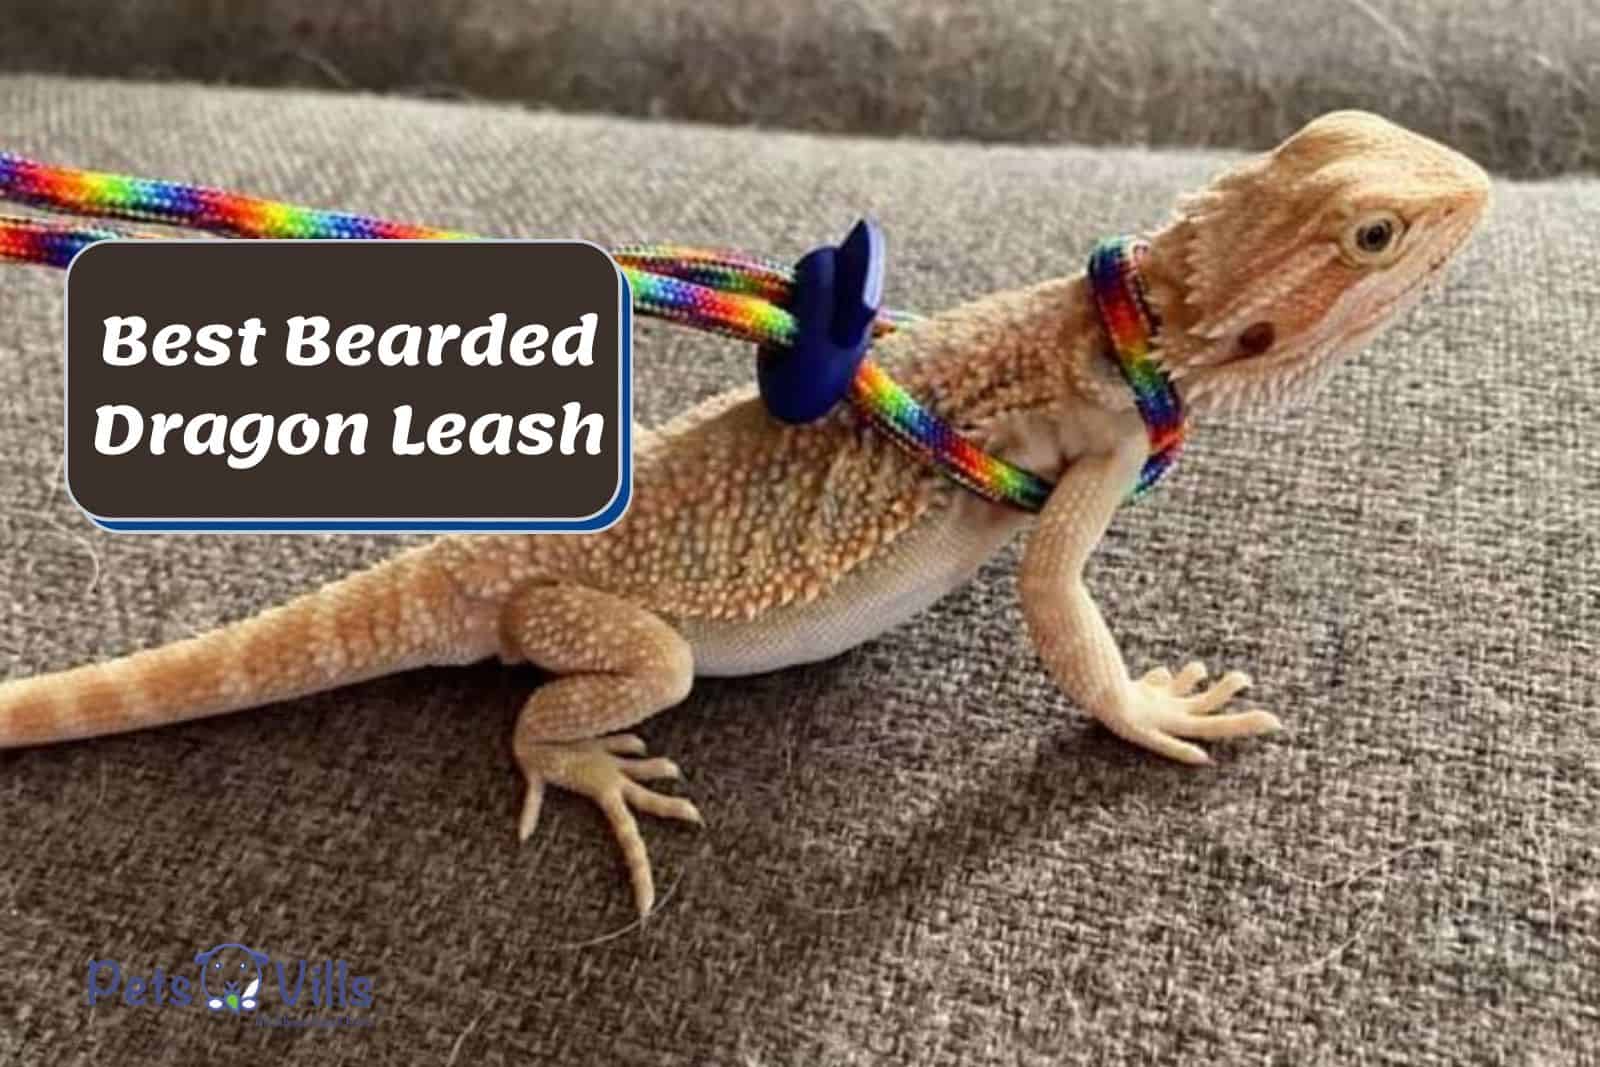 A bearded dragon with a colorful leash on